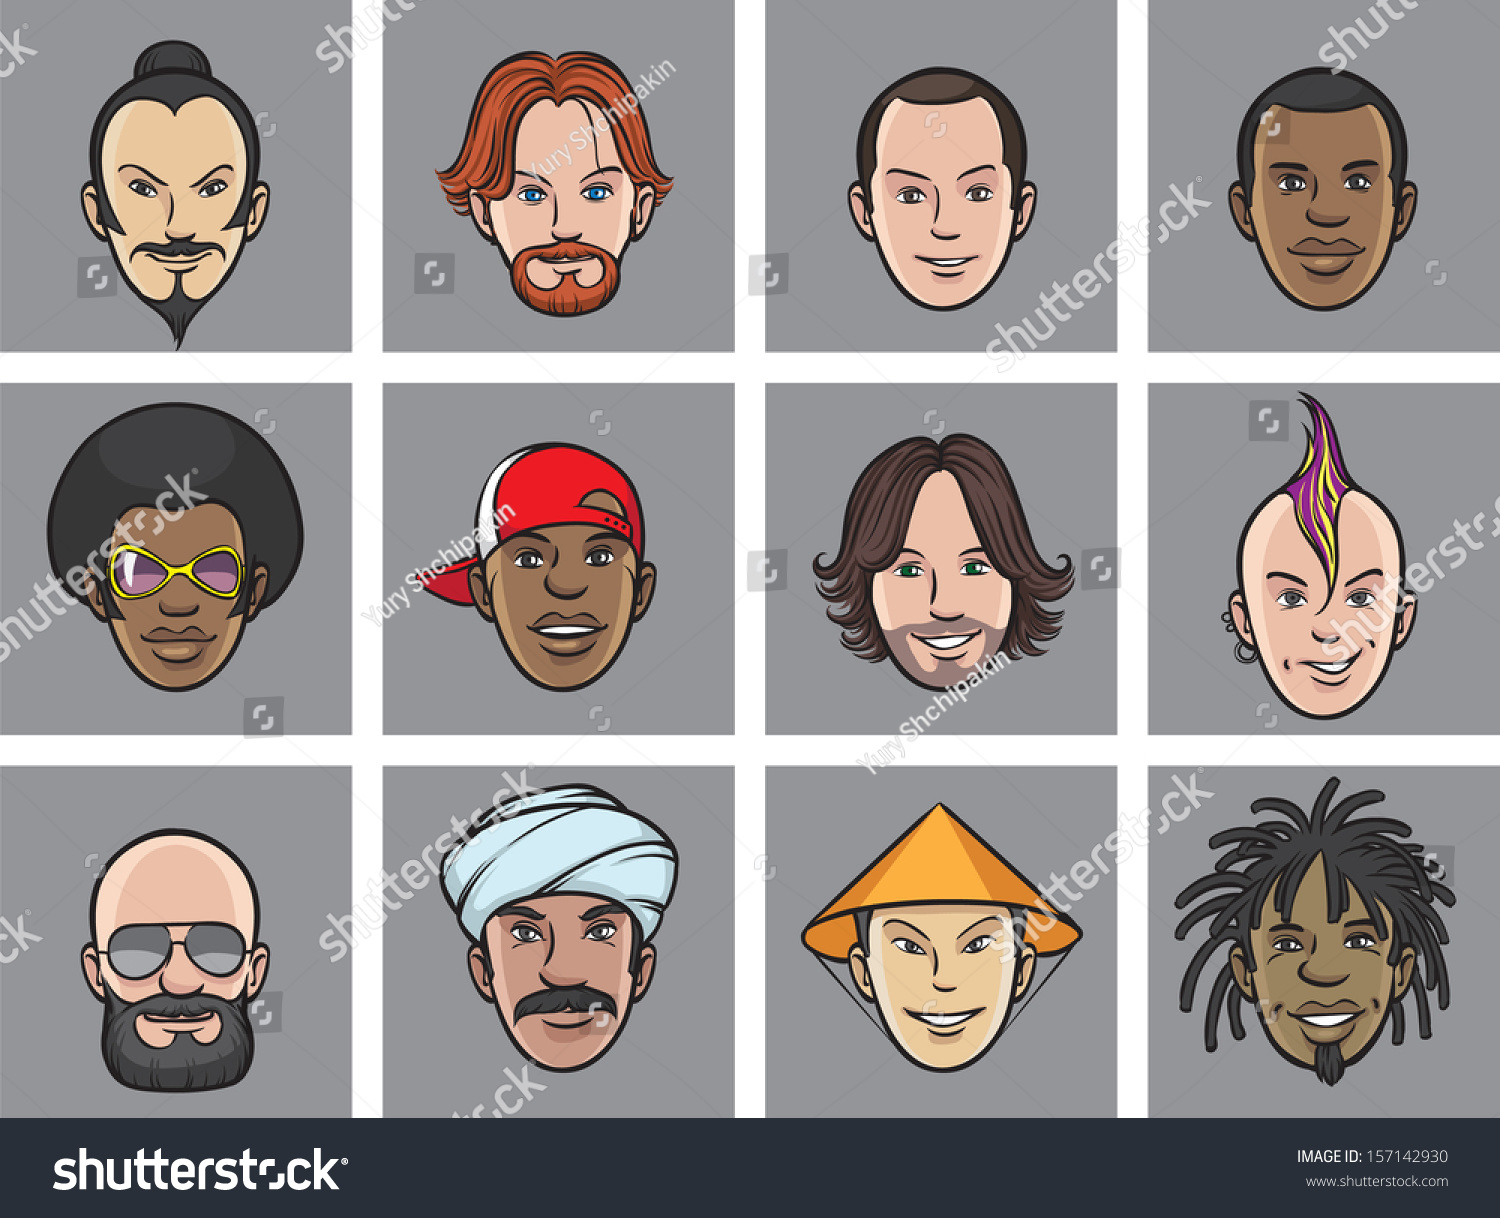 SVG of Vector illustration of Cartoon avatar eccentric faces. Easy-edit layered vector EPS10 file scalable to any size without quality loss. High resolution raster JPG file is included. svg